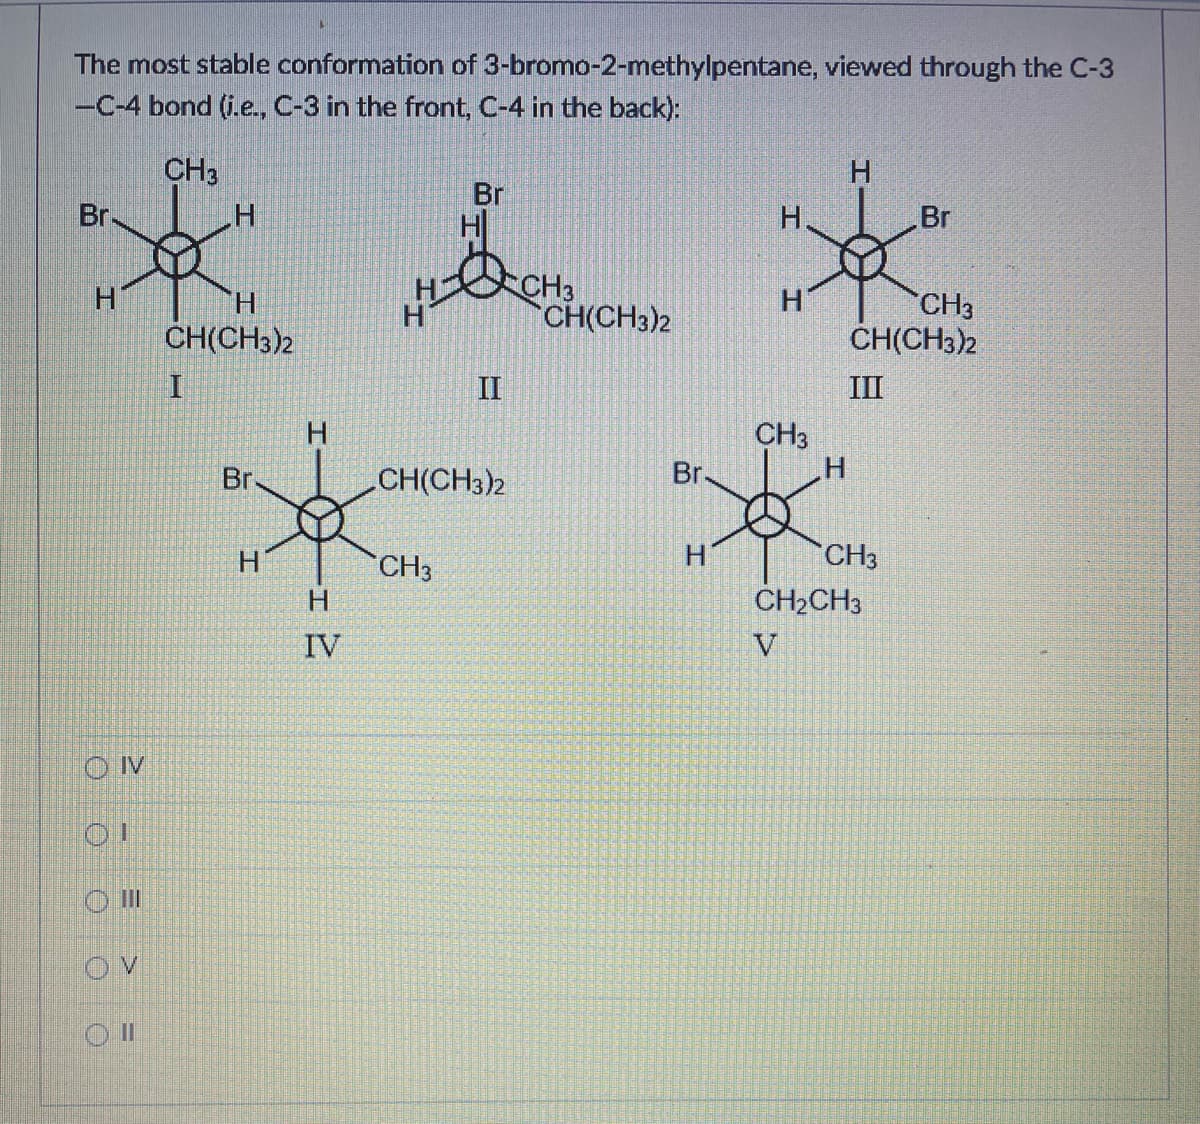 The most stable conformation of 3-bromo-2-methylpentane, viewed through the C-3
-C-4 bond (i.e., C-3 in the front, C-4 in the back):
CH3
Br.
H
*
H
H
CH(CH3)2
OVV
OI
III
V
OII
I
Br
H
H
-I
H
IV
Br
H
H&
II
CH(CH3)2
CH3
CH3
CH(CH3)2
Br
H
H
H
CH3
H
H
CH3
CH(CH3)2
III
CH3
Br
CH₂CH3
V